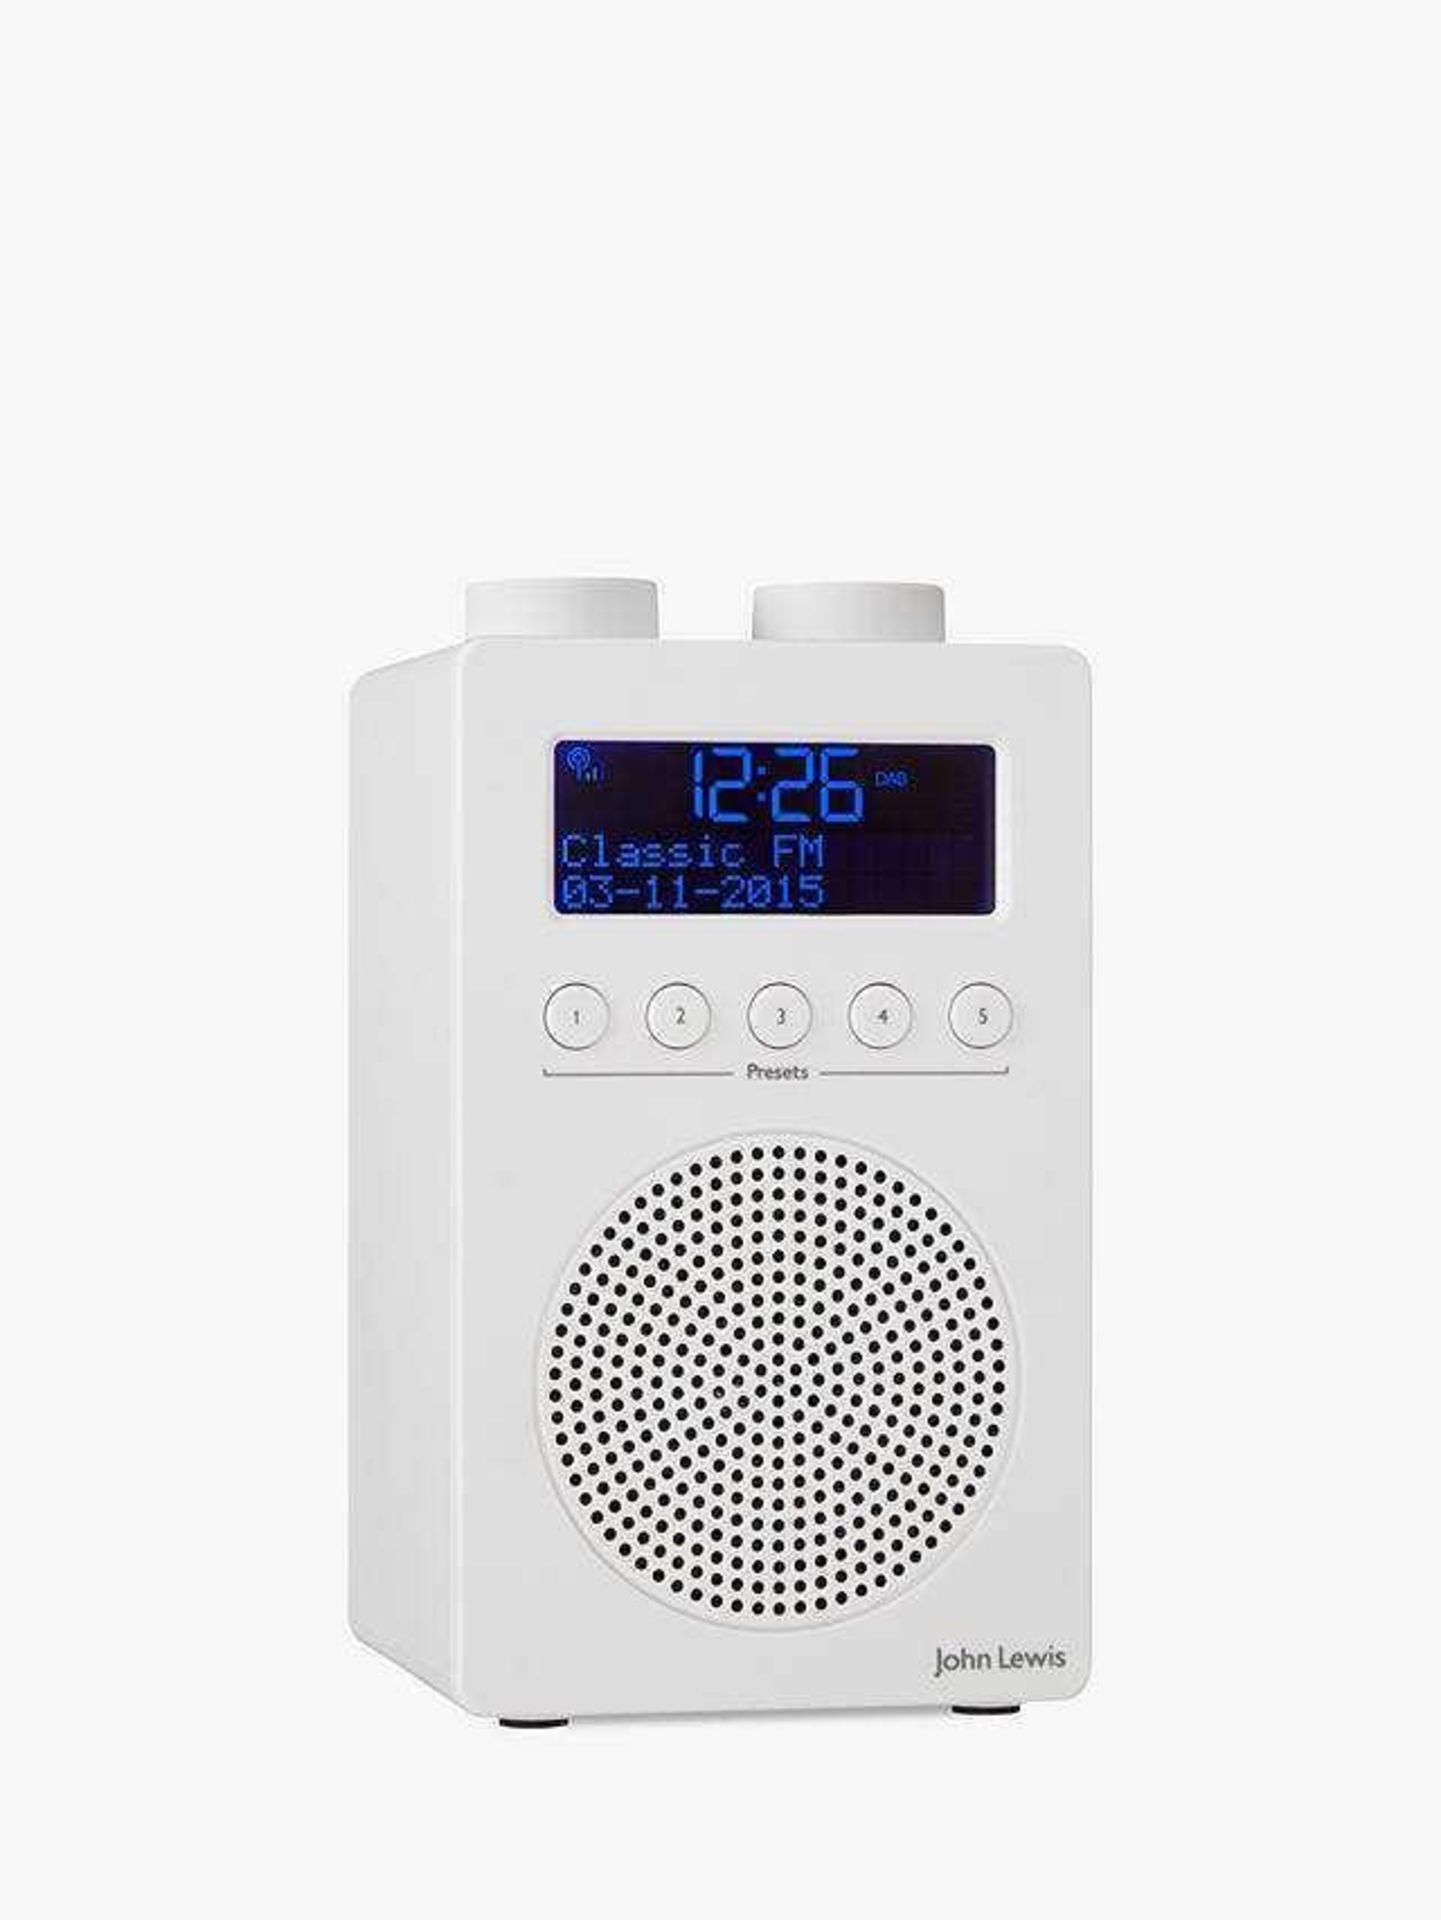 Rrp £40 Each Boxed John Lewis Spectrum Solo Dab And Fm Digital Radios - Image 5 of 7